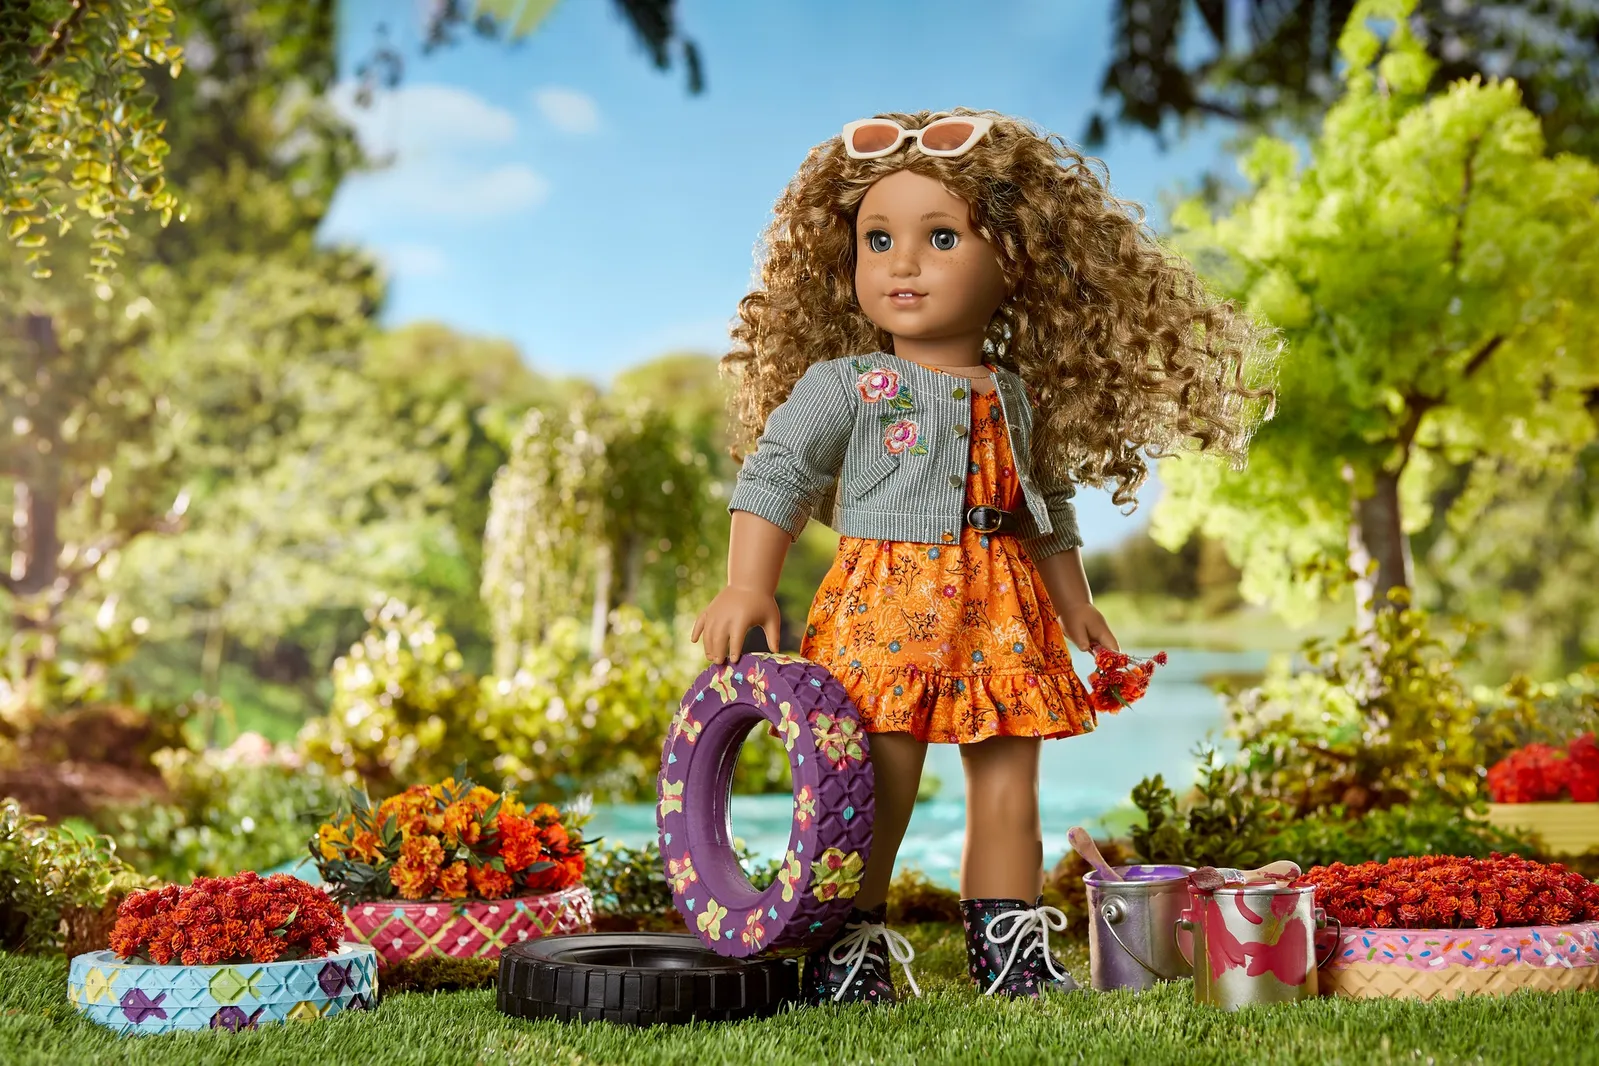 Why This American Girl Doll Inspires Environmental Activism | At ...